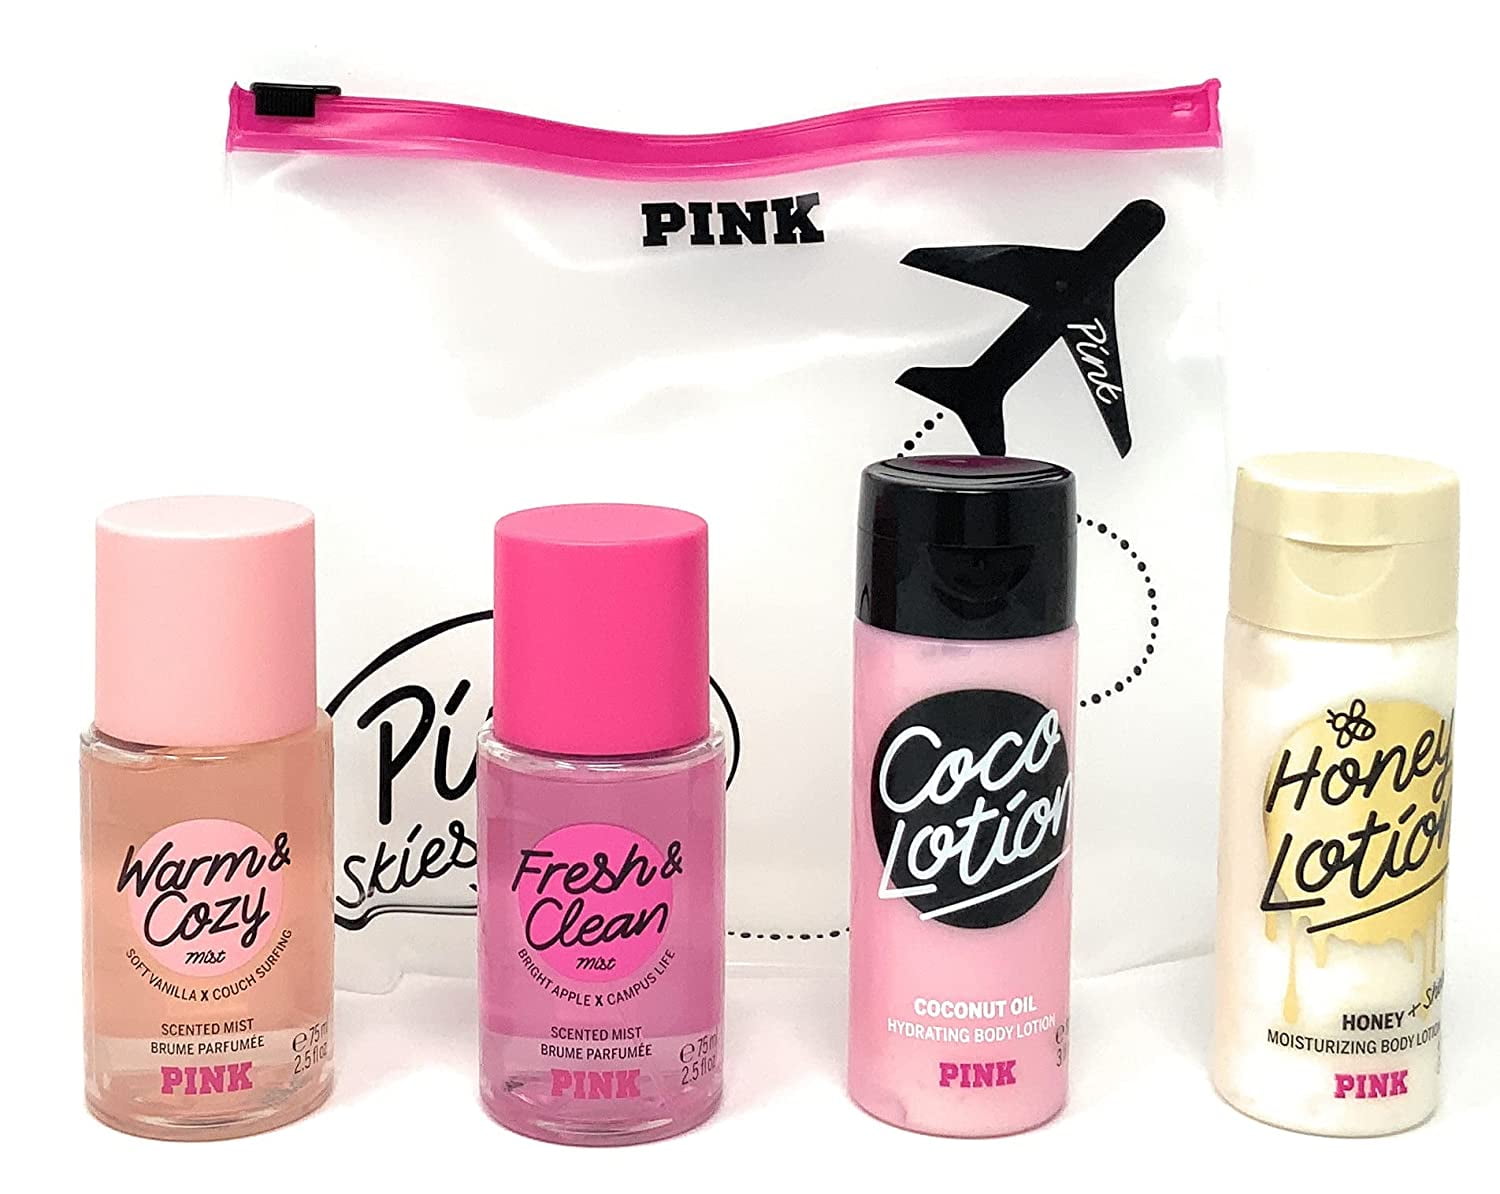 Victoria's Secret Pink Mini Body Mist Gift Set - Fresh and Clean, Warm and Cozy, Cool and Bright, Coco and Glow